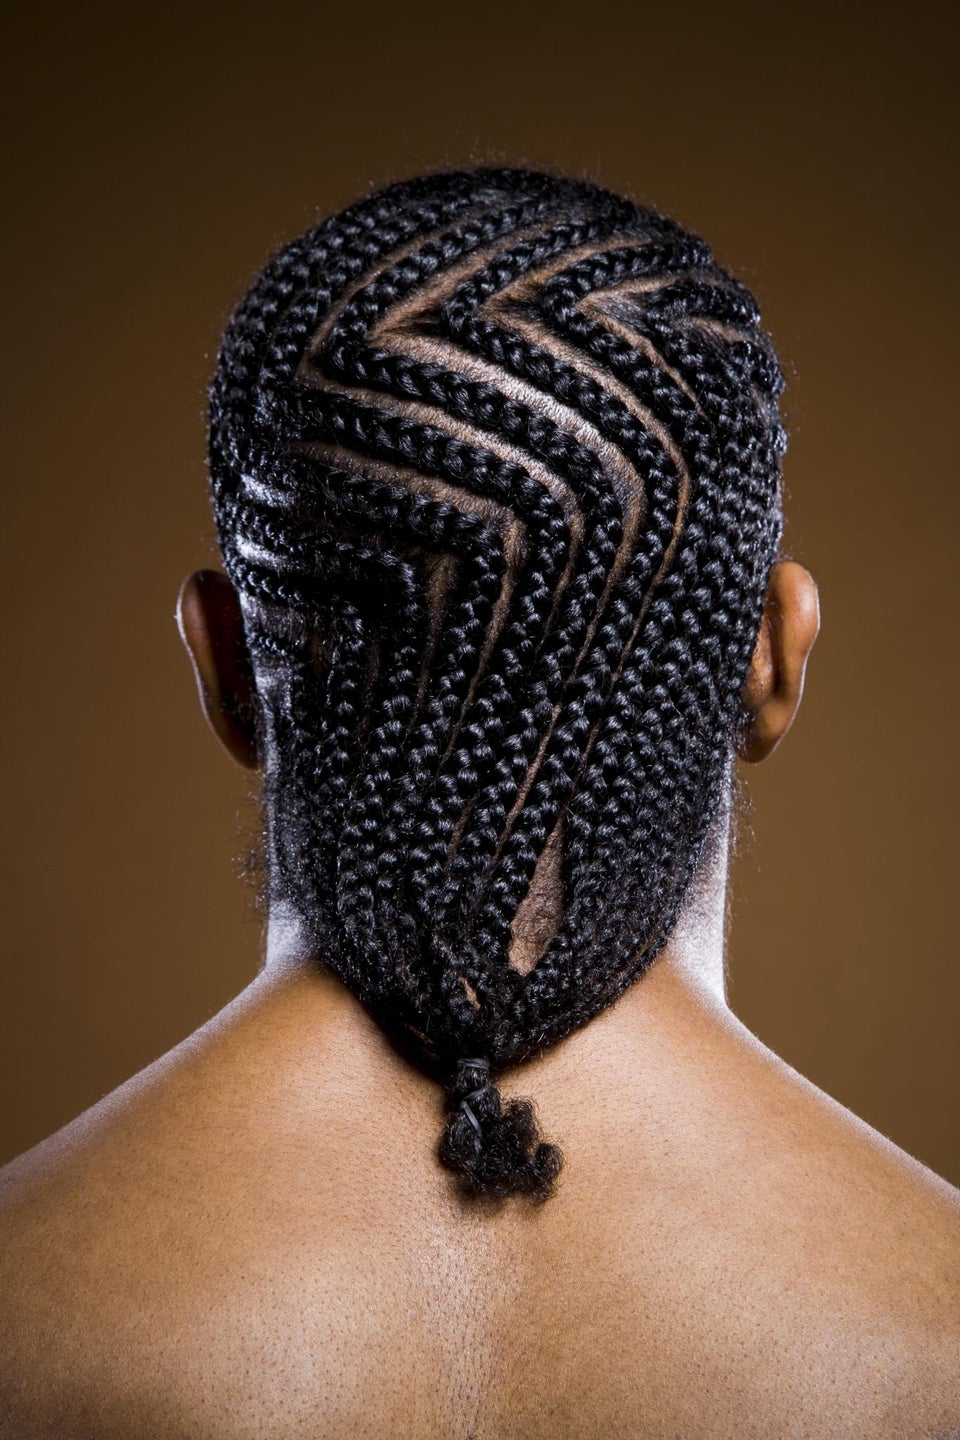 This Man Rocking Five Different Styles of Cornrows Is Your Daily Dose of #HairGoals